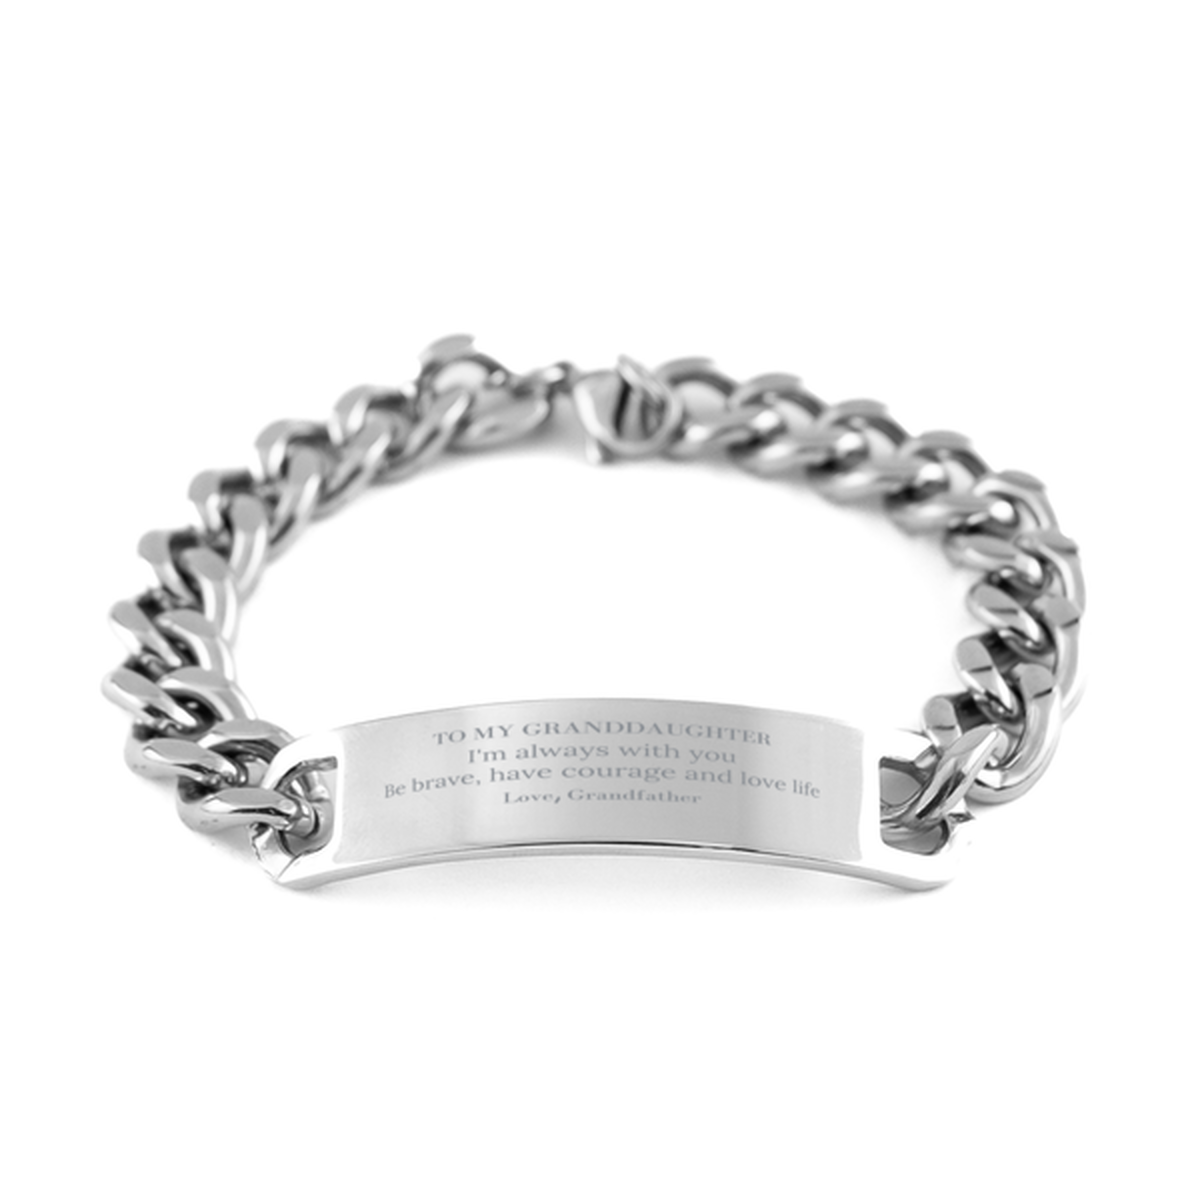 To My Granddaughter Gifts from Grandfather, Unique Cuban Chain Stainless Steel Bracelet Inspirational Christmas Birthday Graduation Gifts for Granddaughter I'm always with you. Be brave, have courage and love life. Love, Grandfather